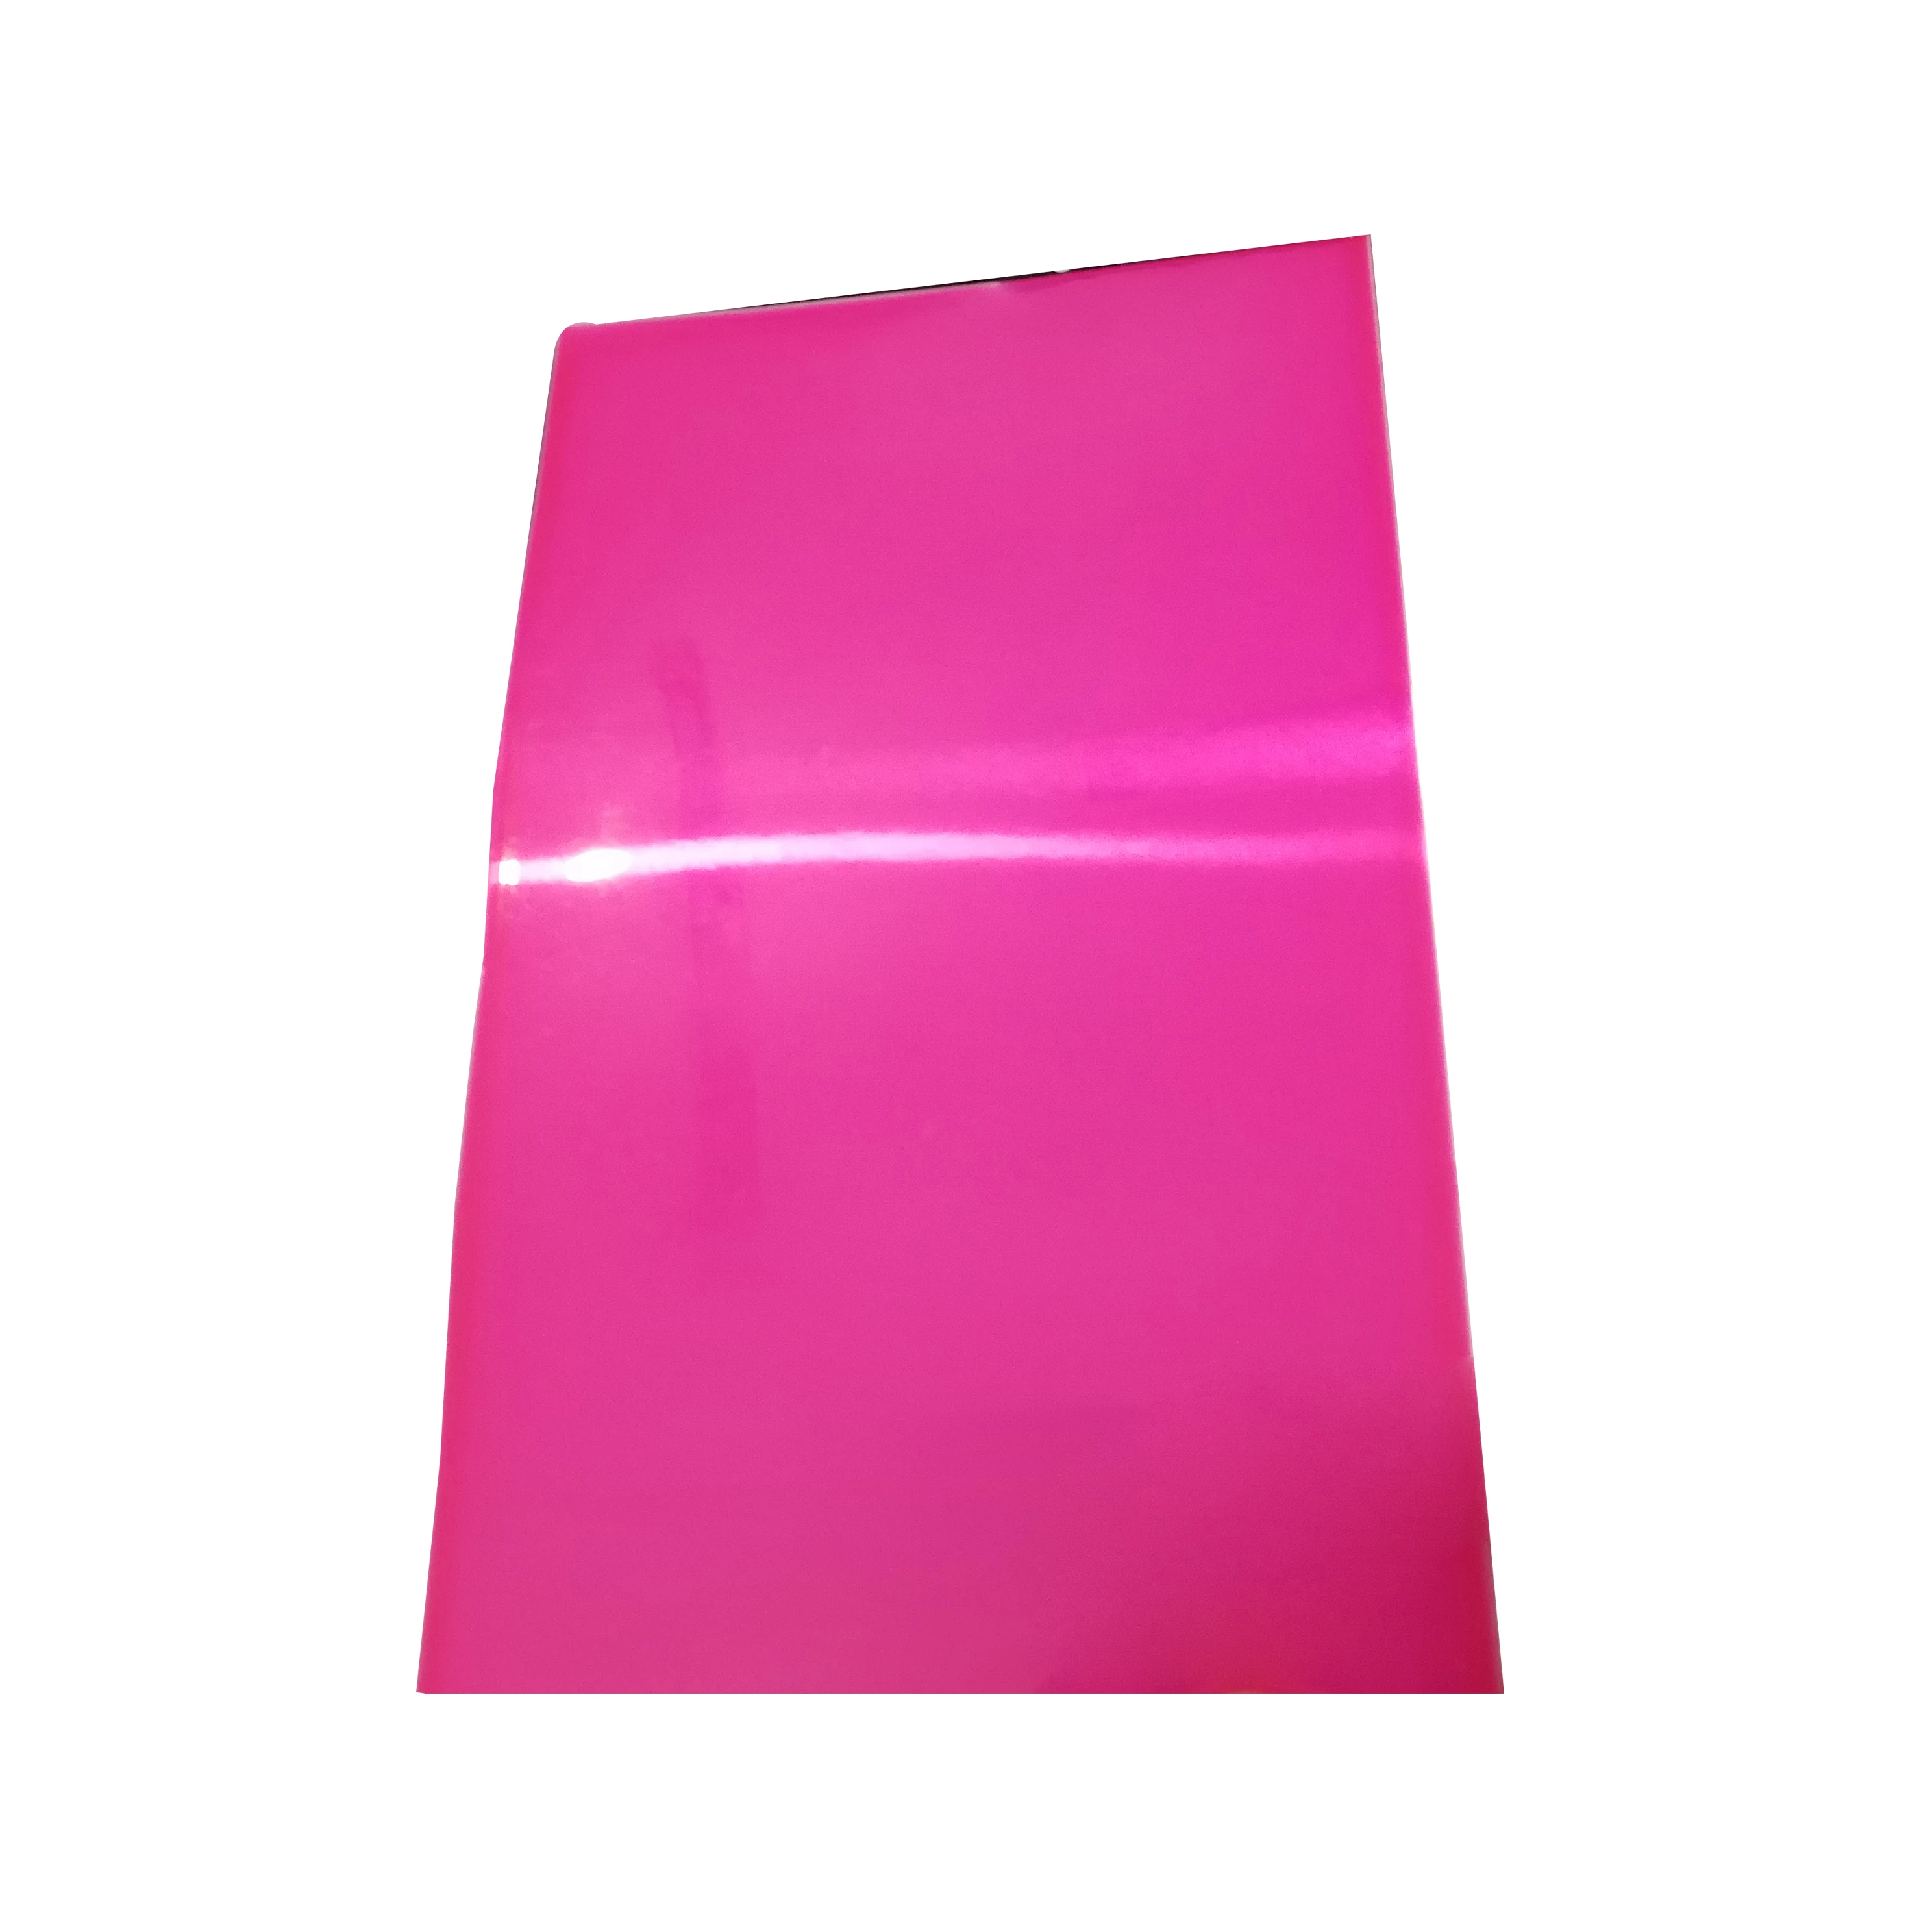 FB Epoxy Polyester Candy Color Bright Pink Powder Coating Powder, Chinese Powder Coating Paint Manufacturers